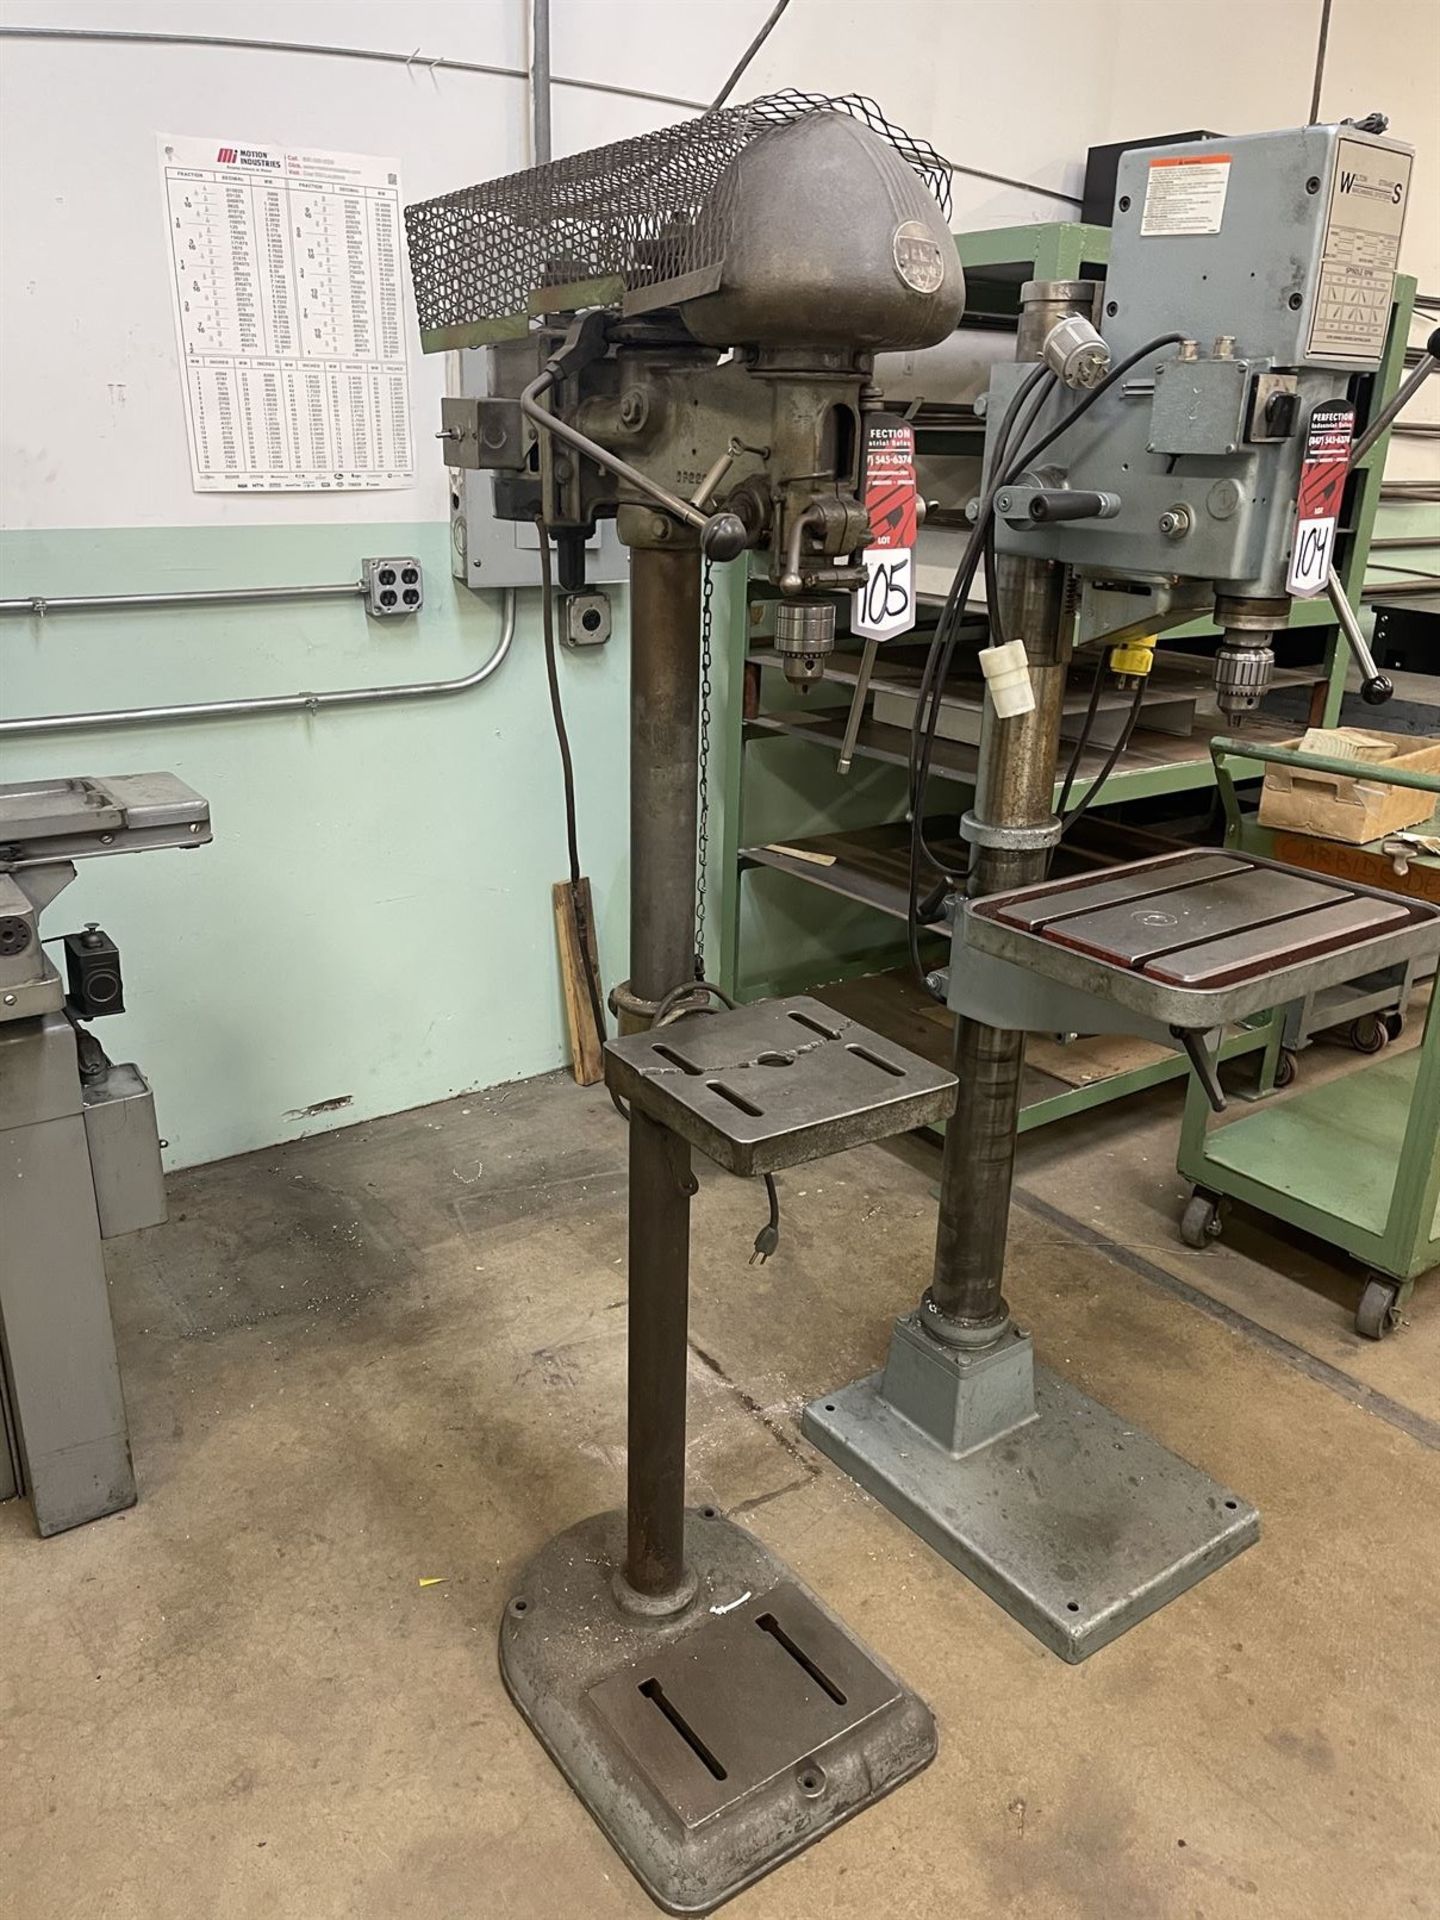 DELTA DP220 MILWAUKEE Drill Press, s/n 51-4488, 7" Throat, 10" x 10" Table - Image 2 of 4